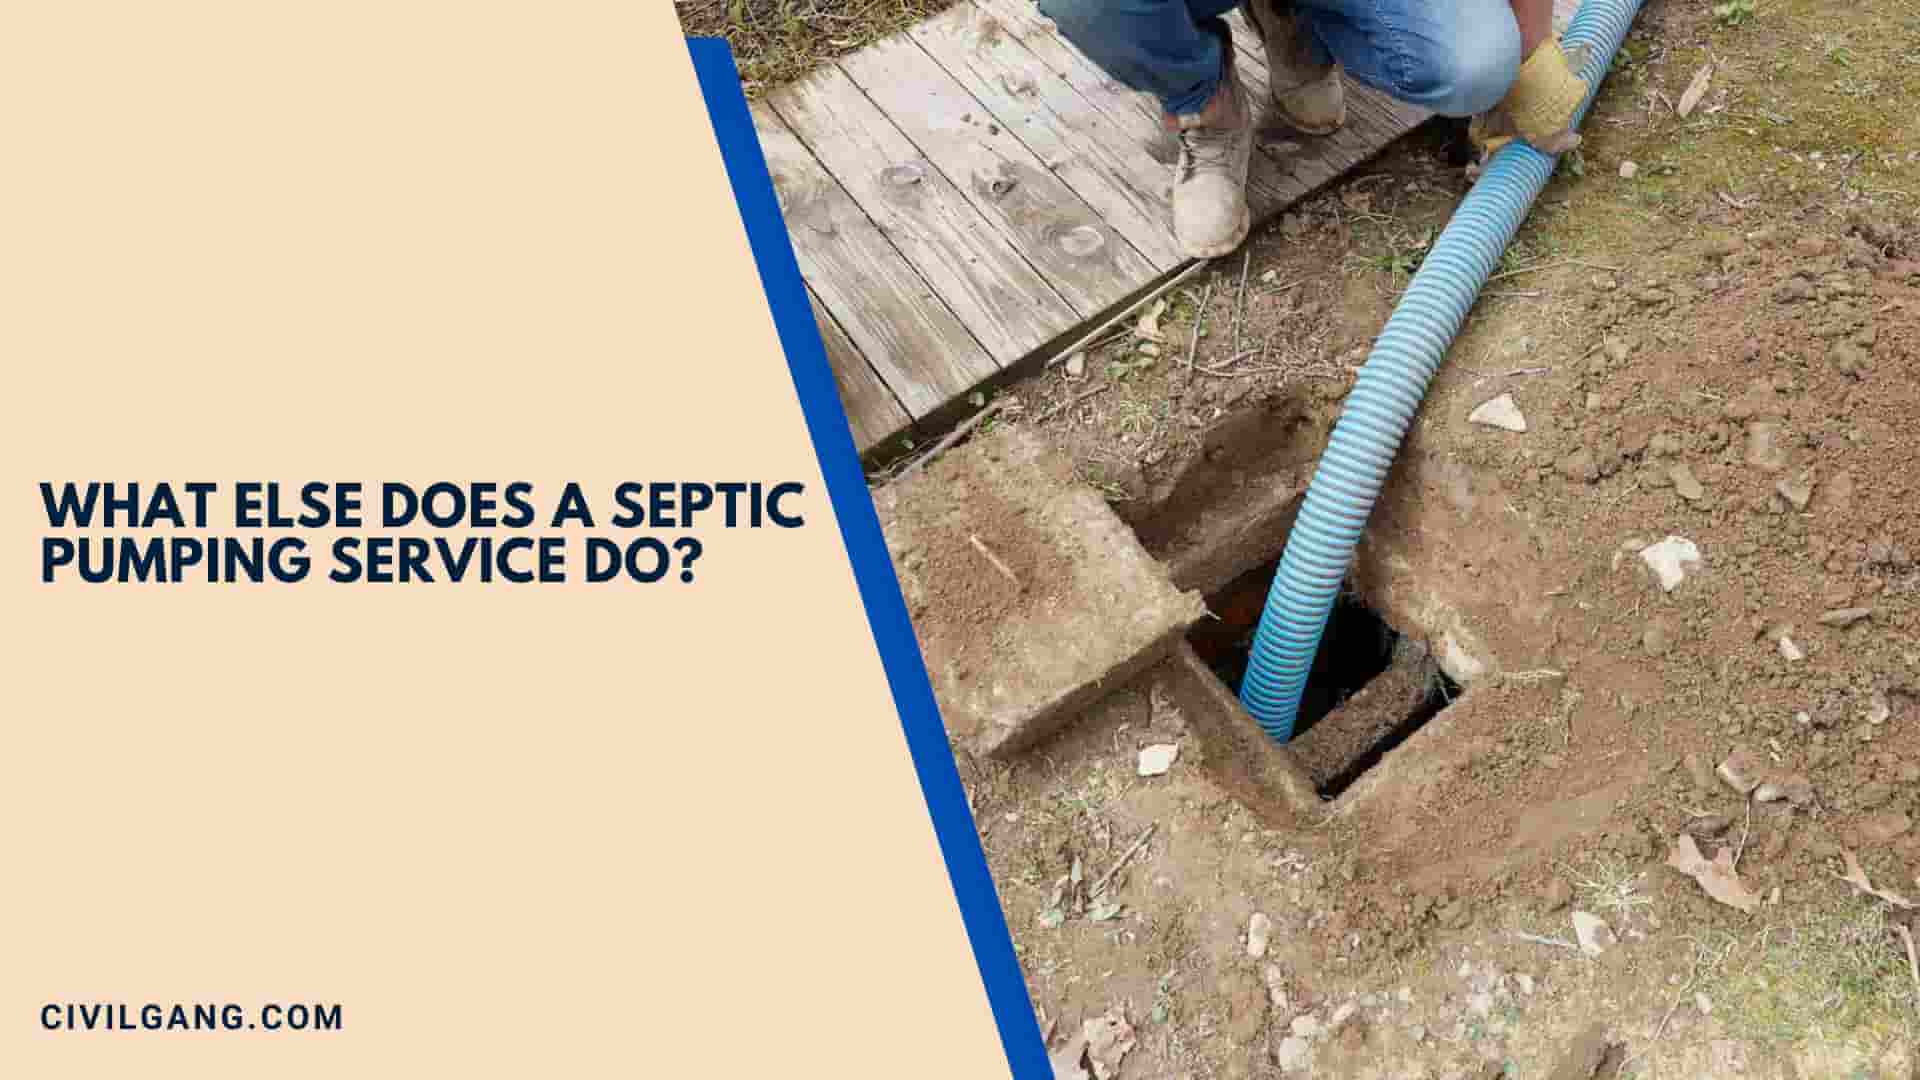 What Else Does a Septic Pumping Service Do